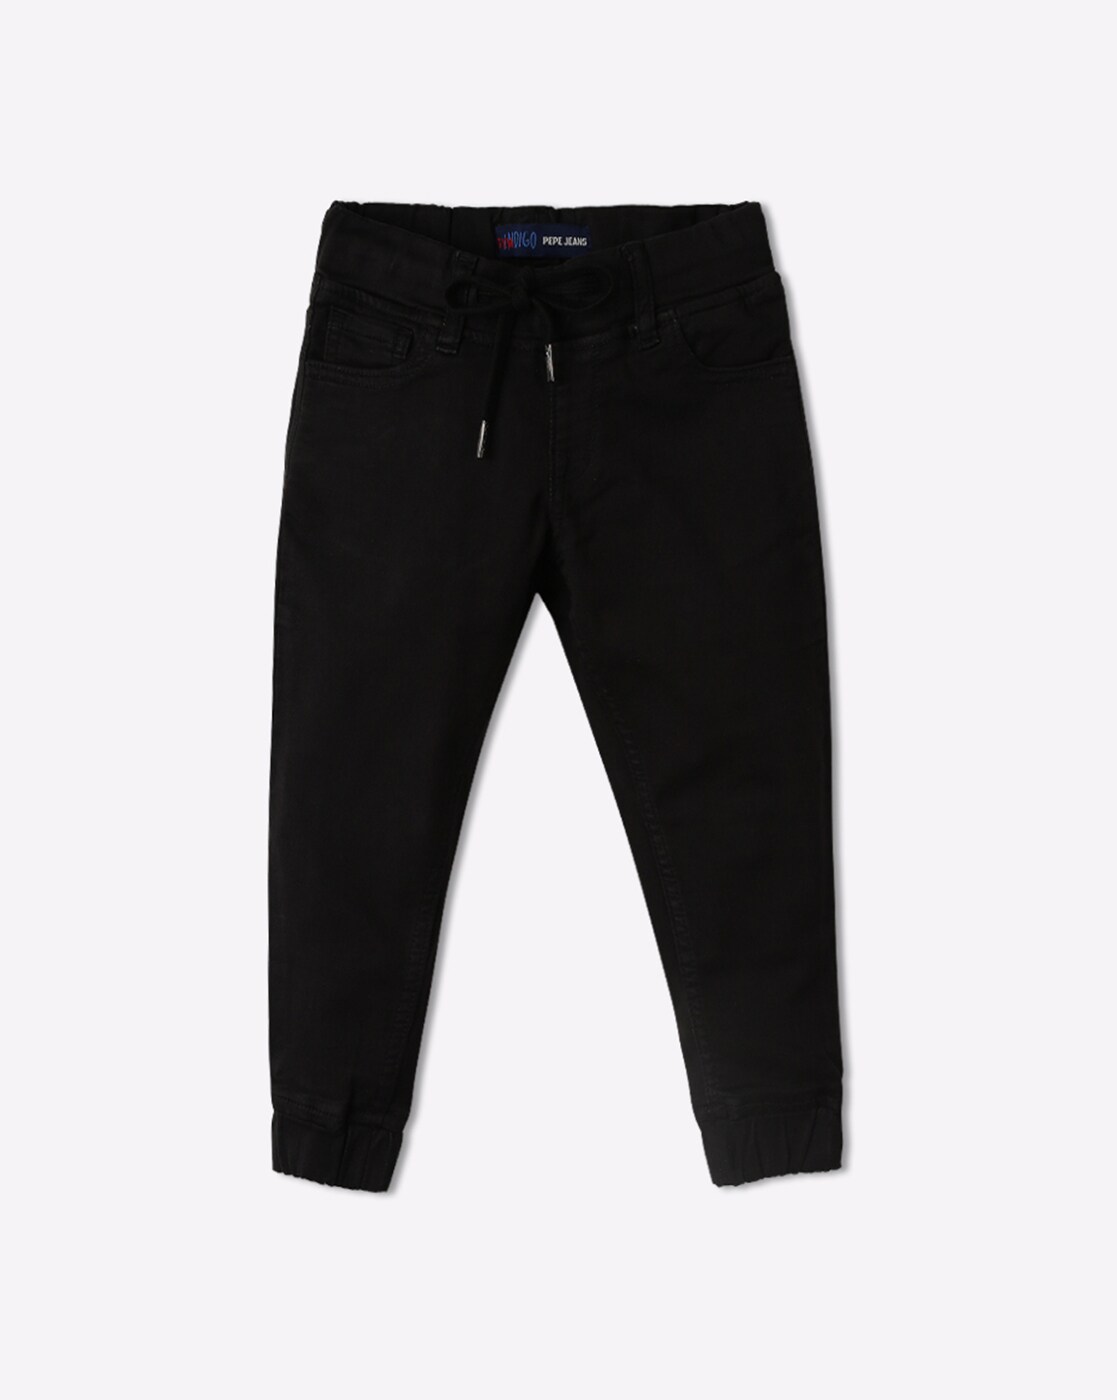 Jeans Pepe Jeans Cash - Trousers and Jeans - Man - Lifestyle